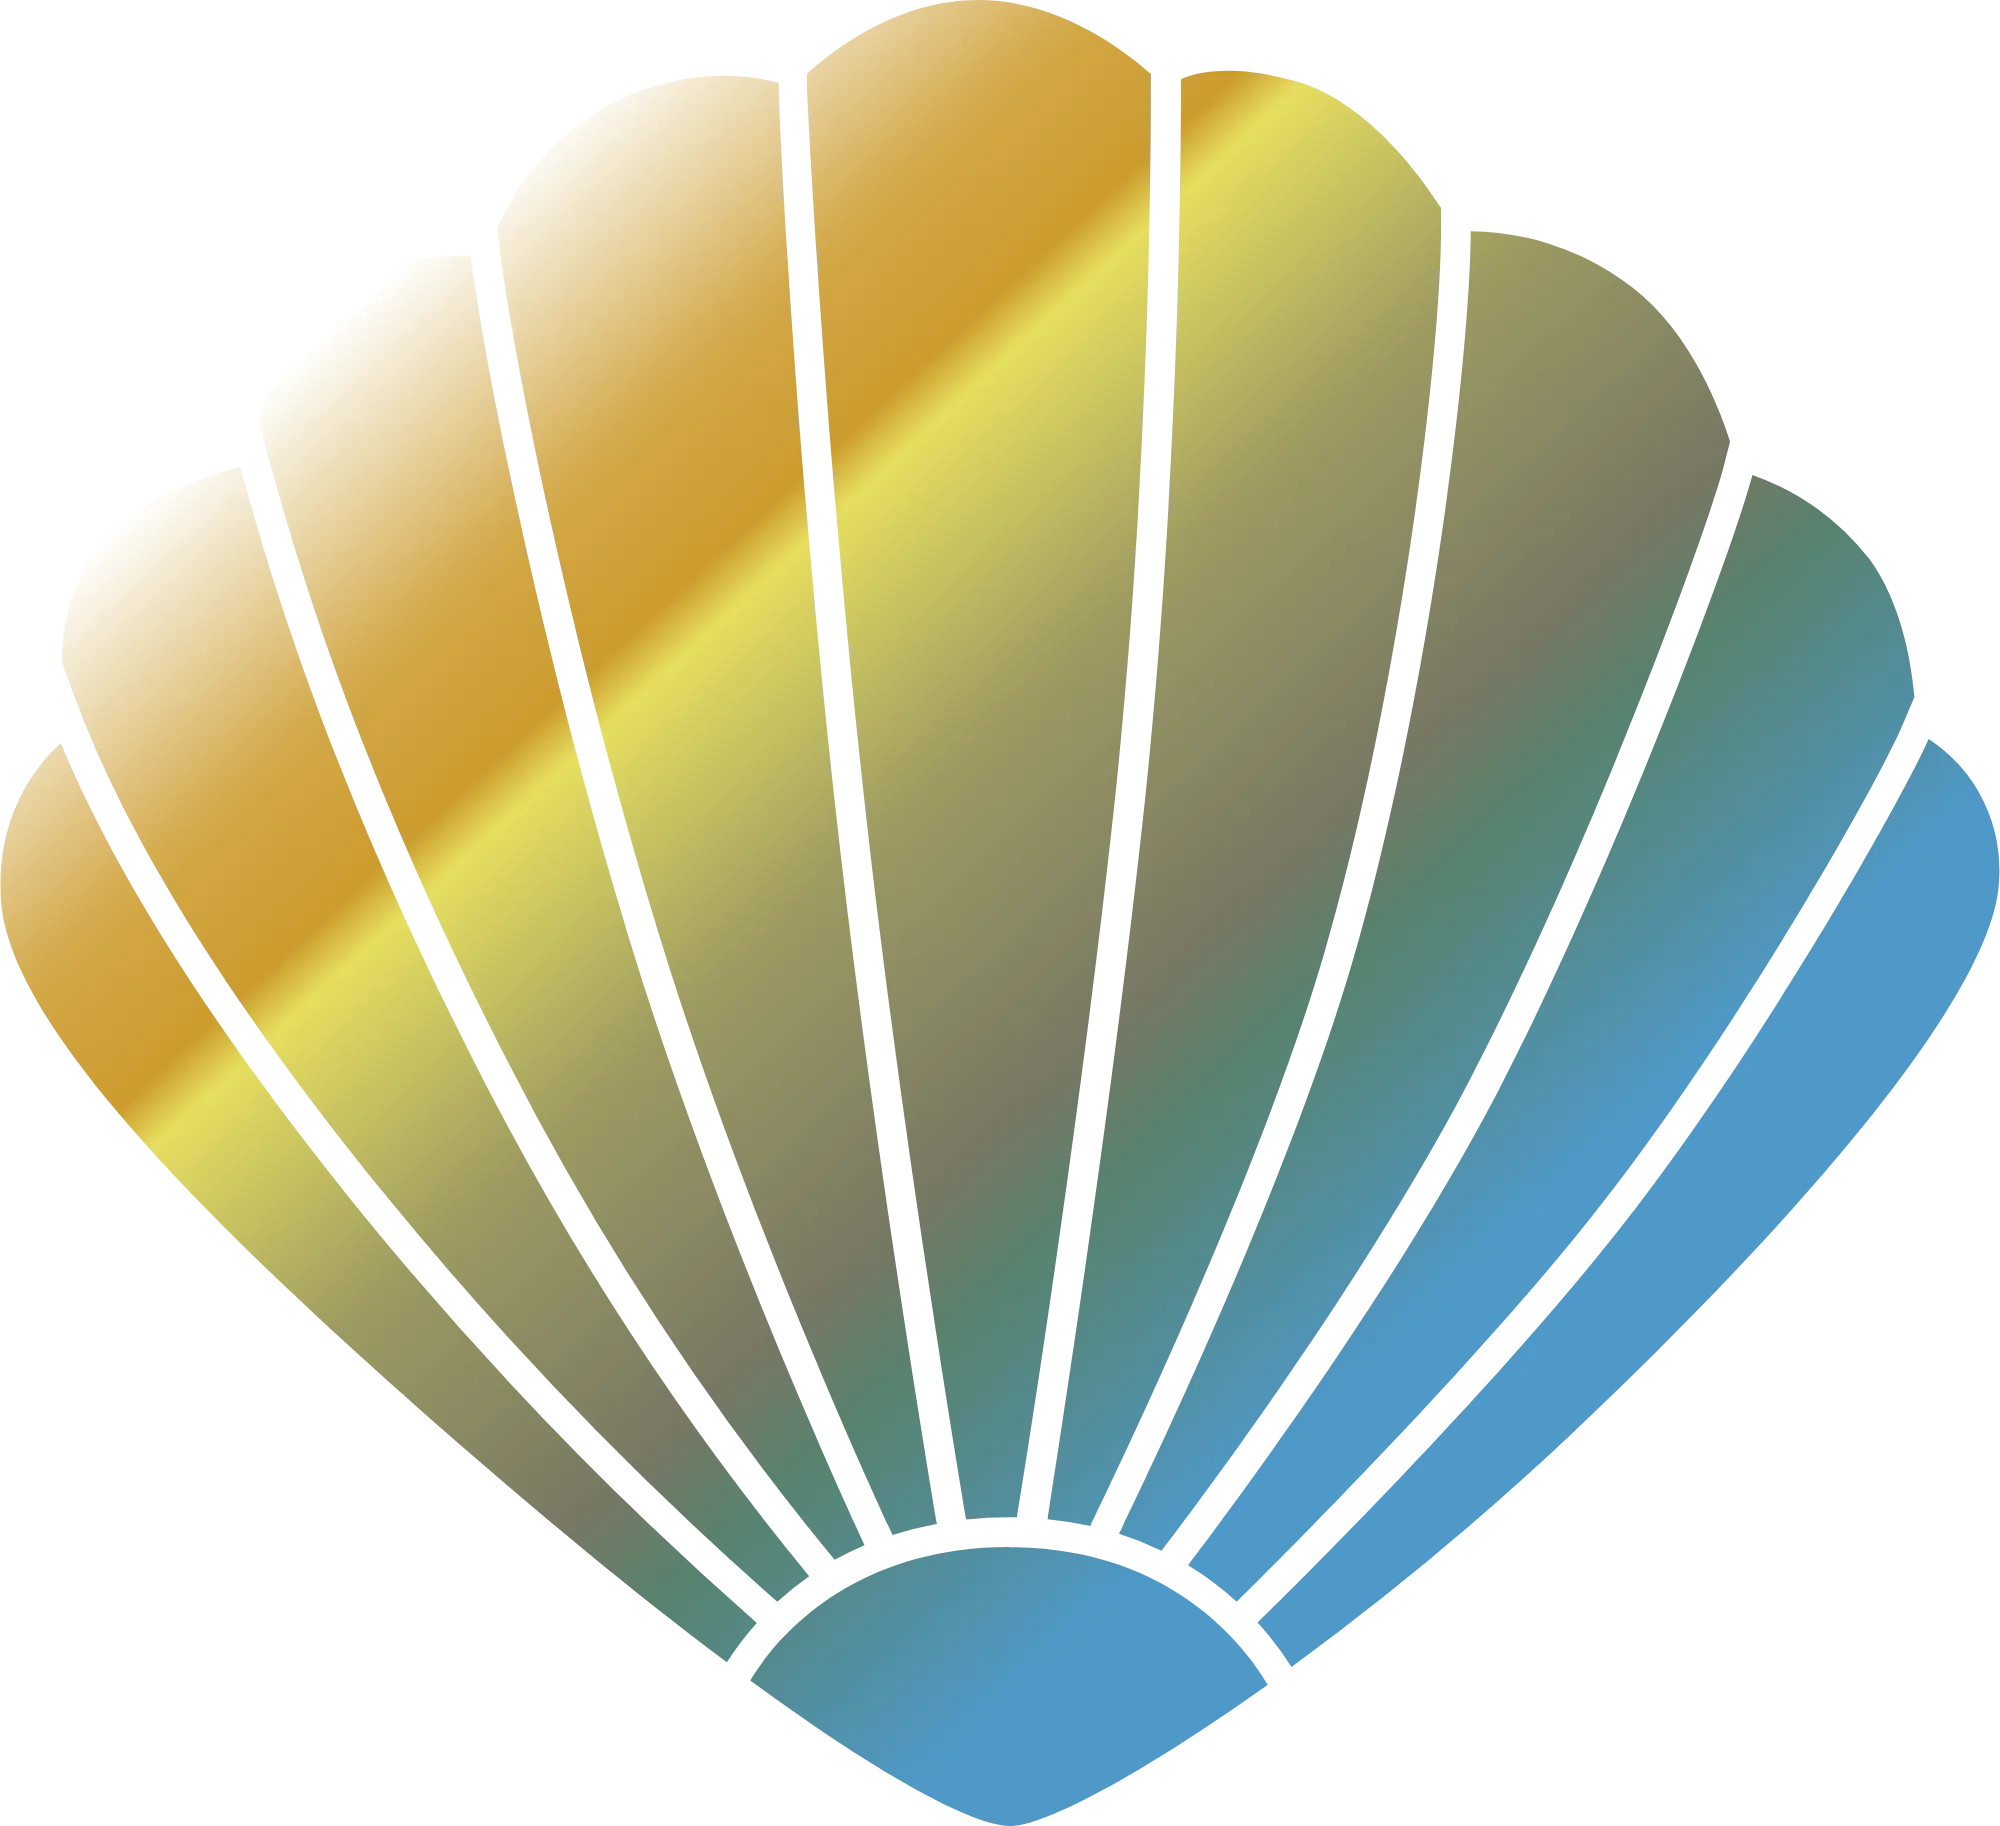 Clams logo in svg format